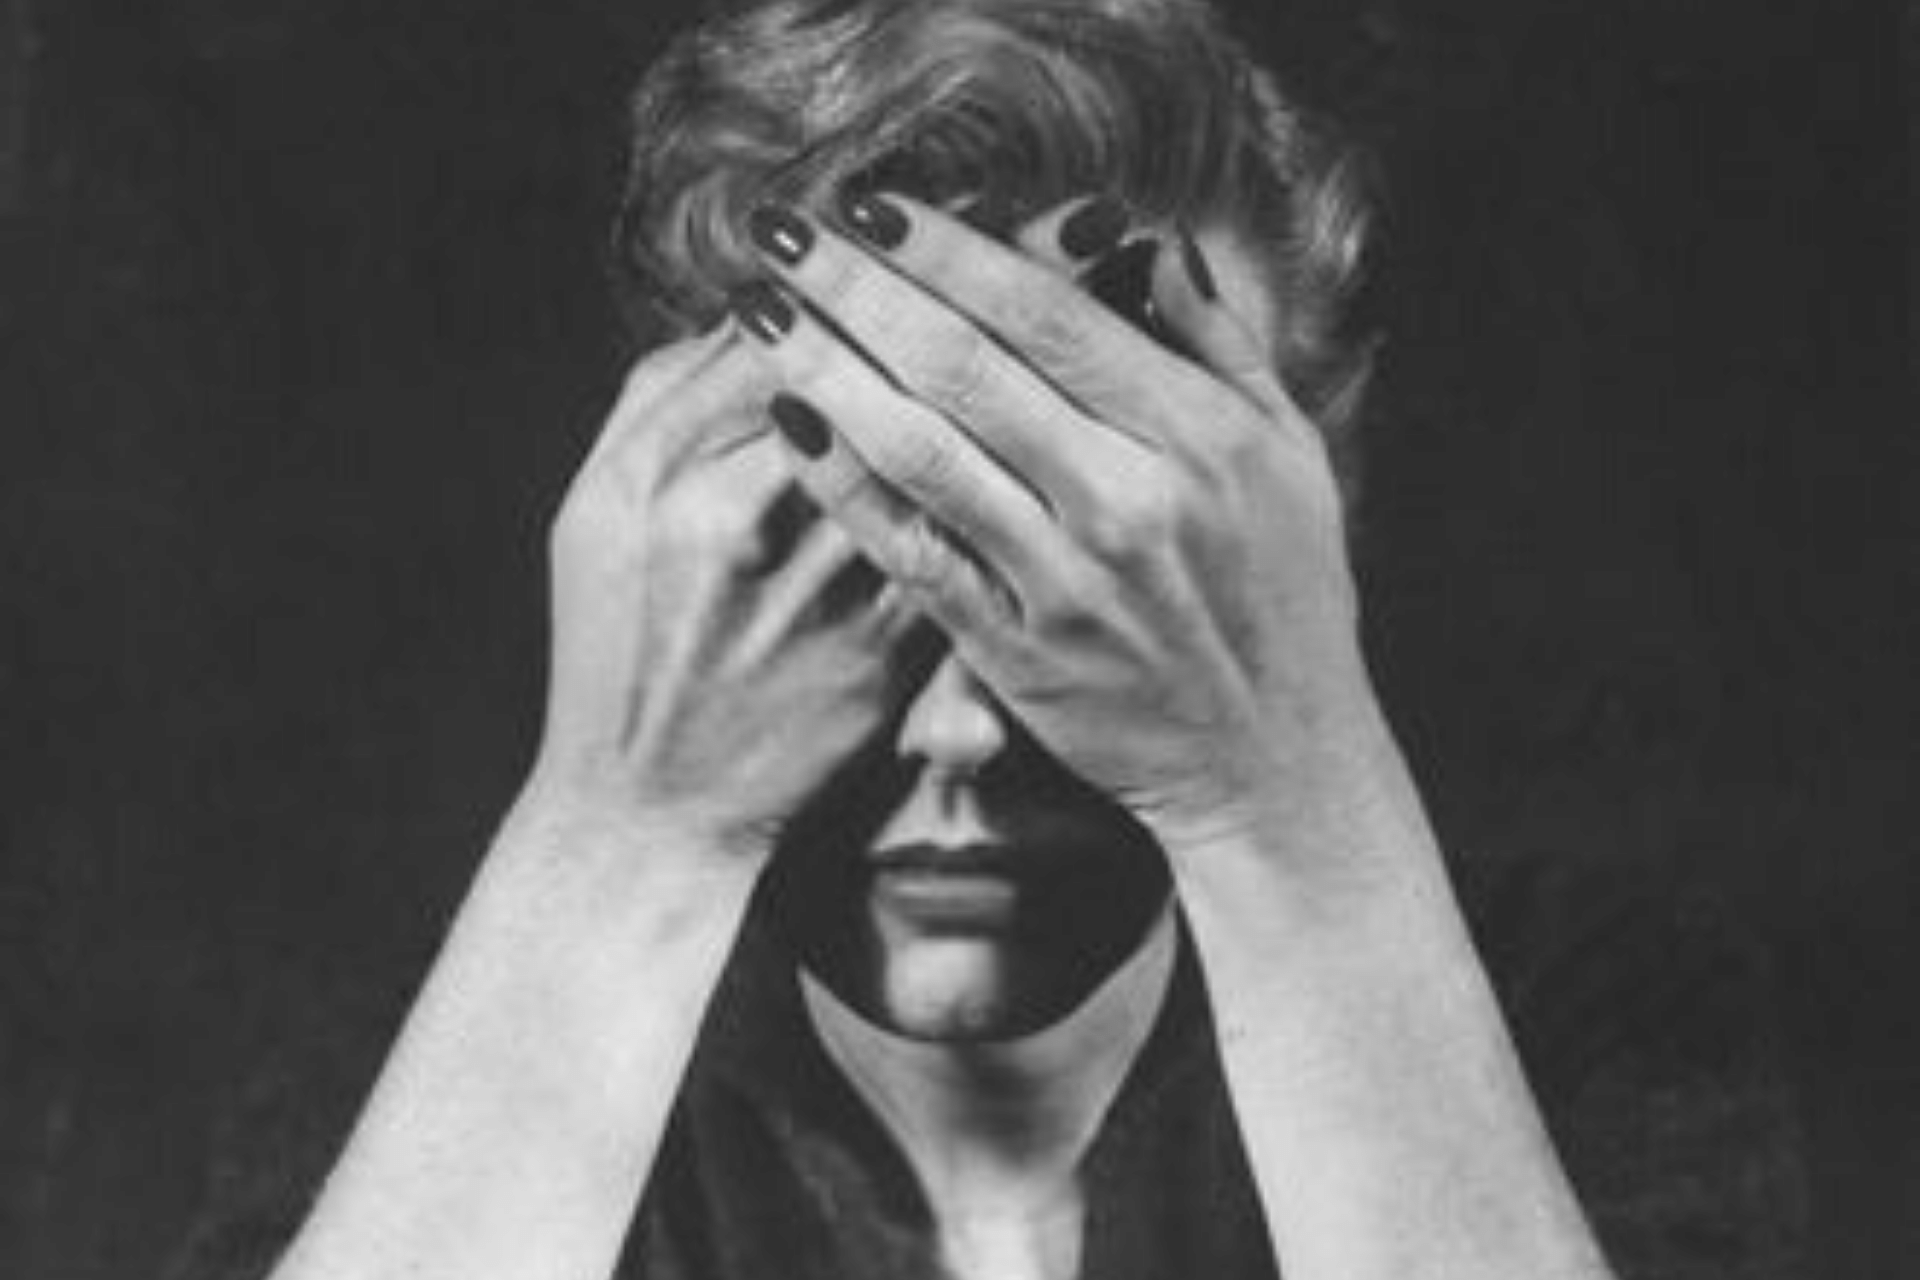 Woman with her hands over her eyes. She looks distressed.